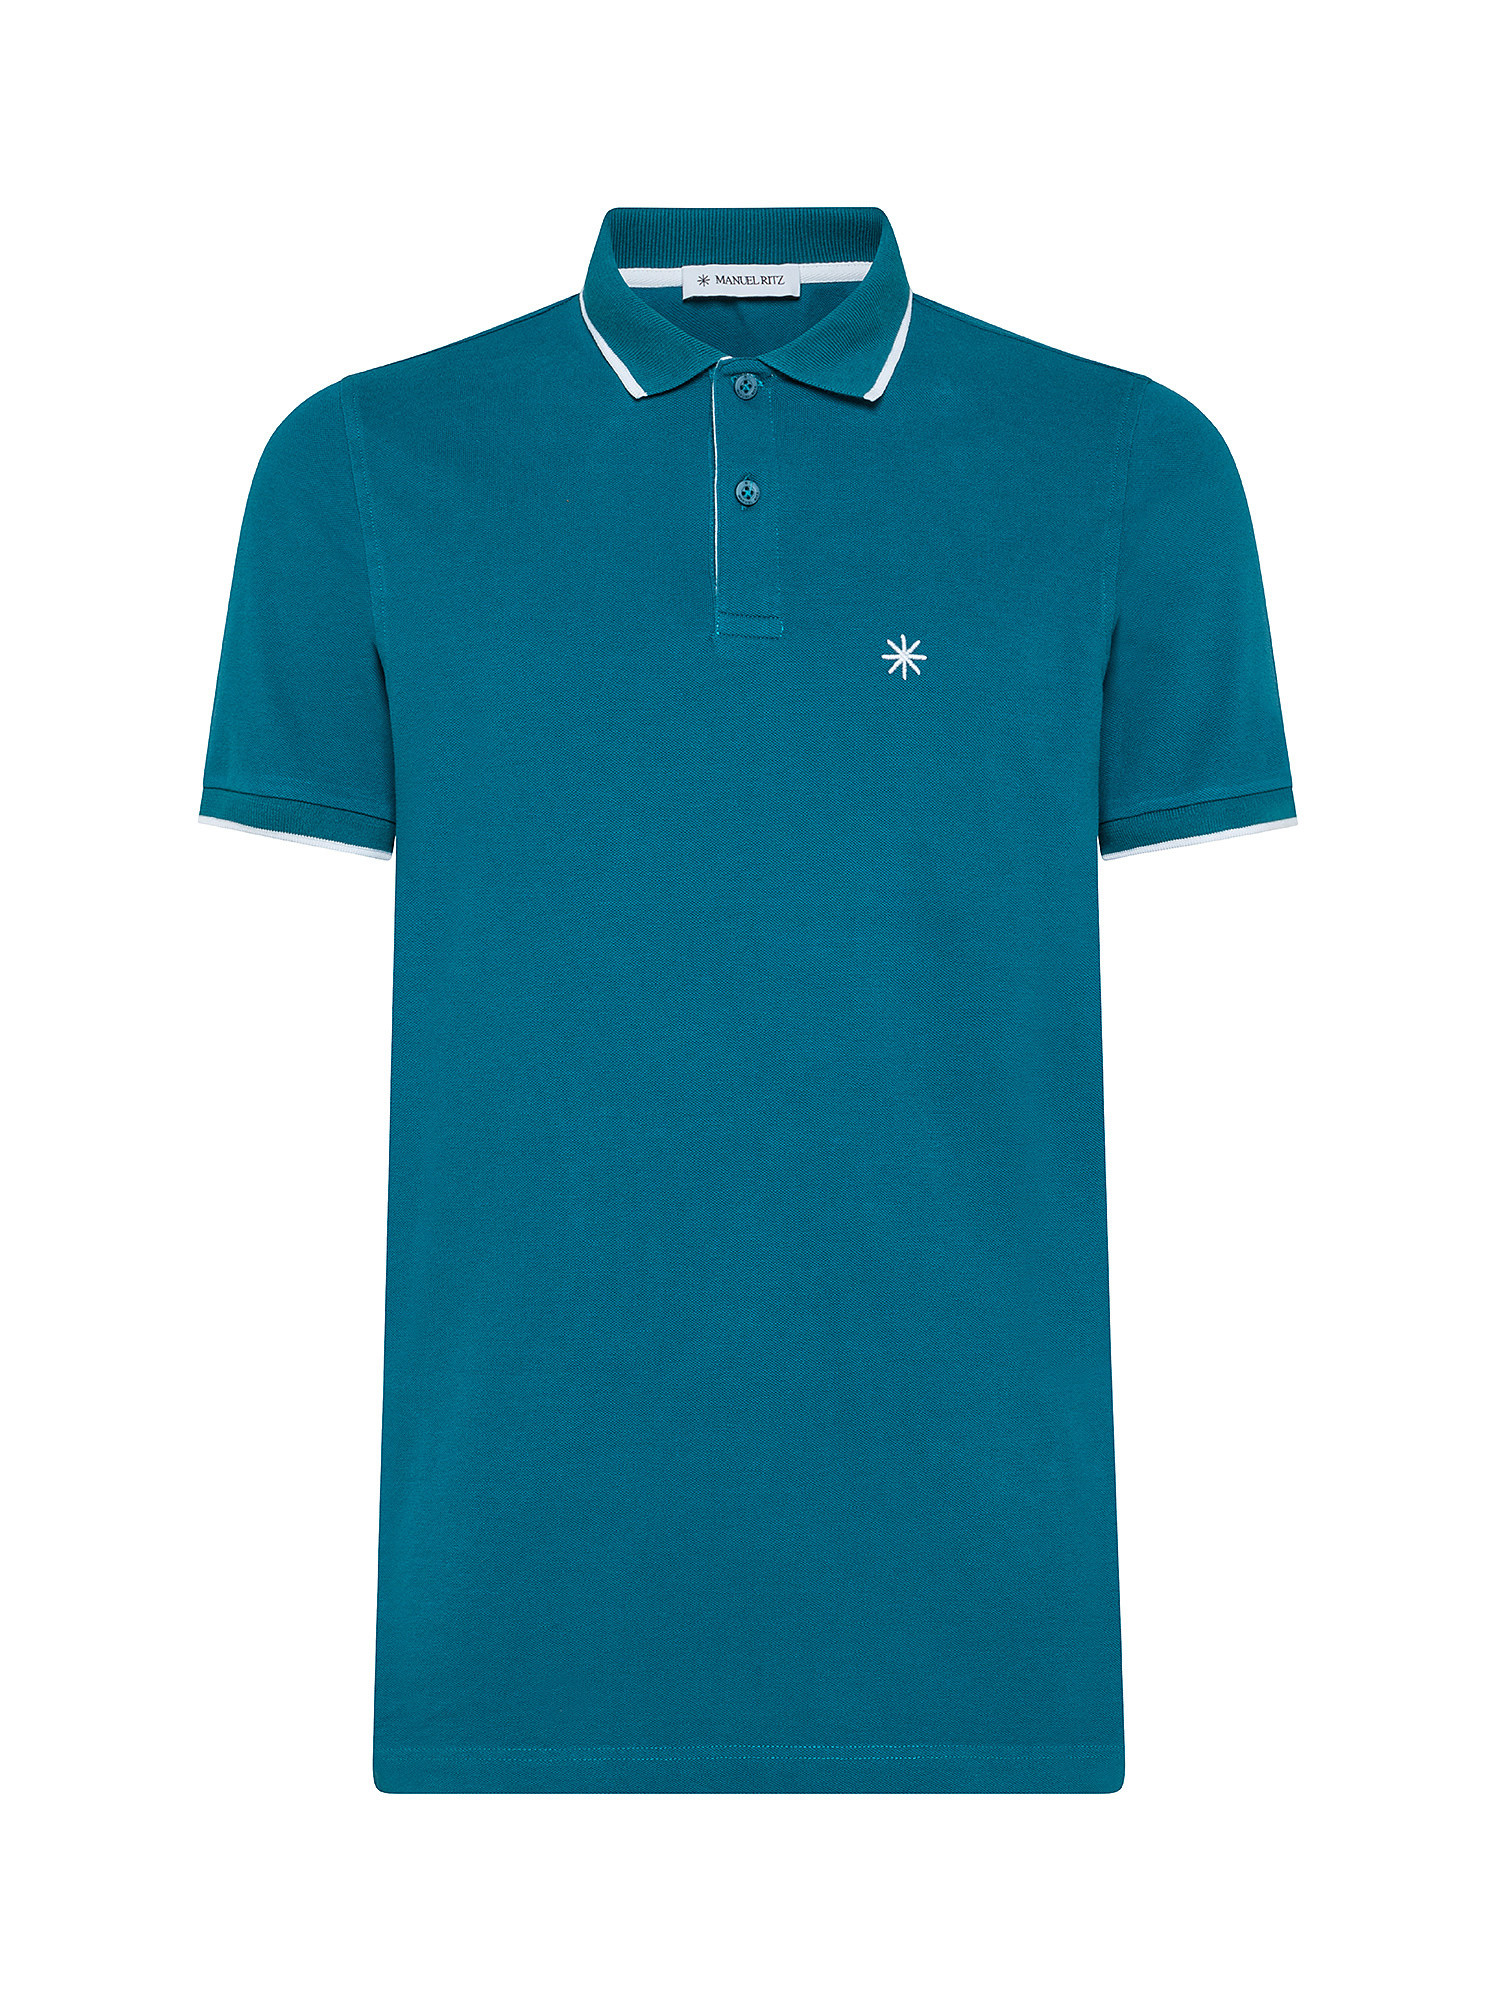 Short sleeve polo shirt, Green teal, large image number 0